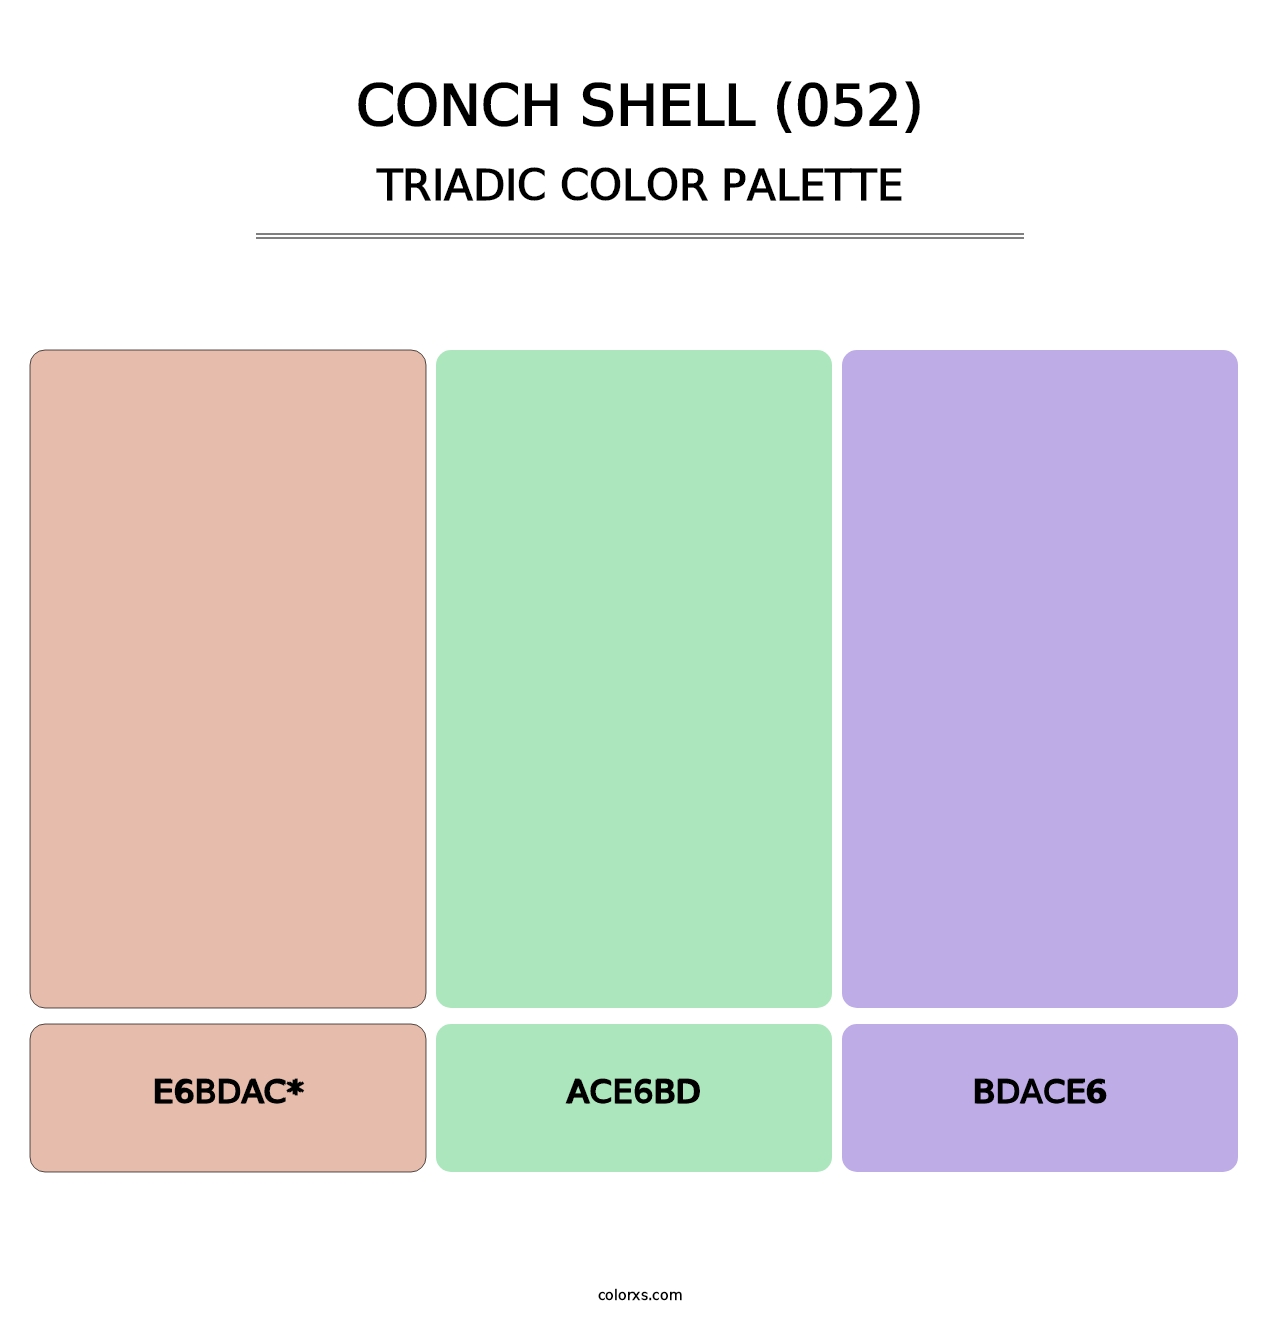 Conch Shell (052) - Triadic Color Palette